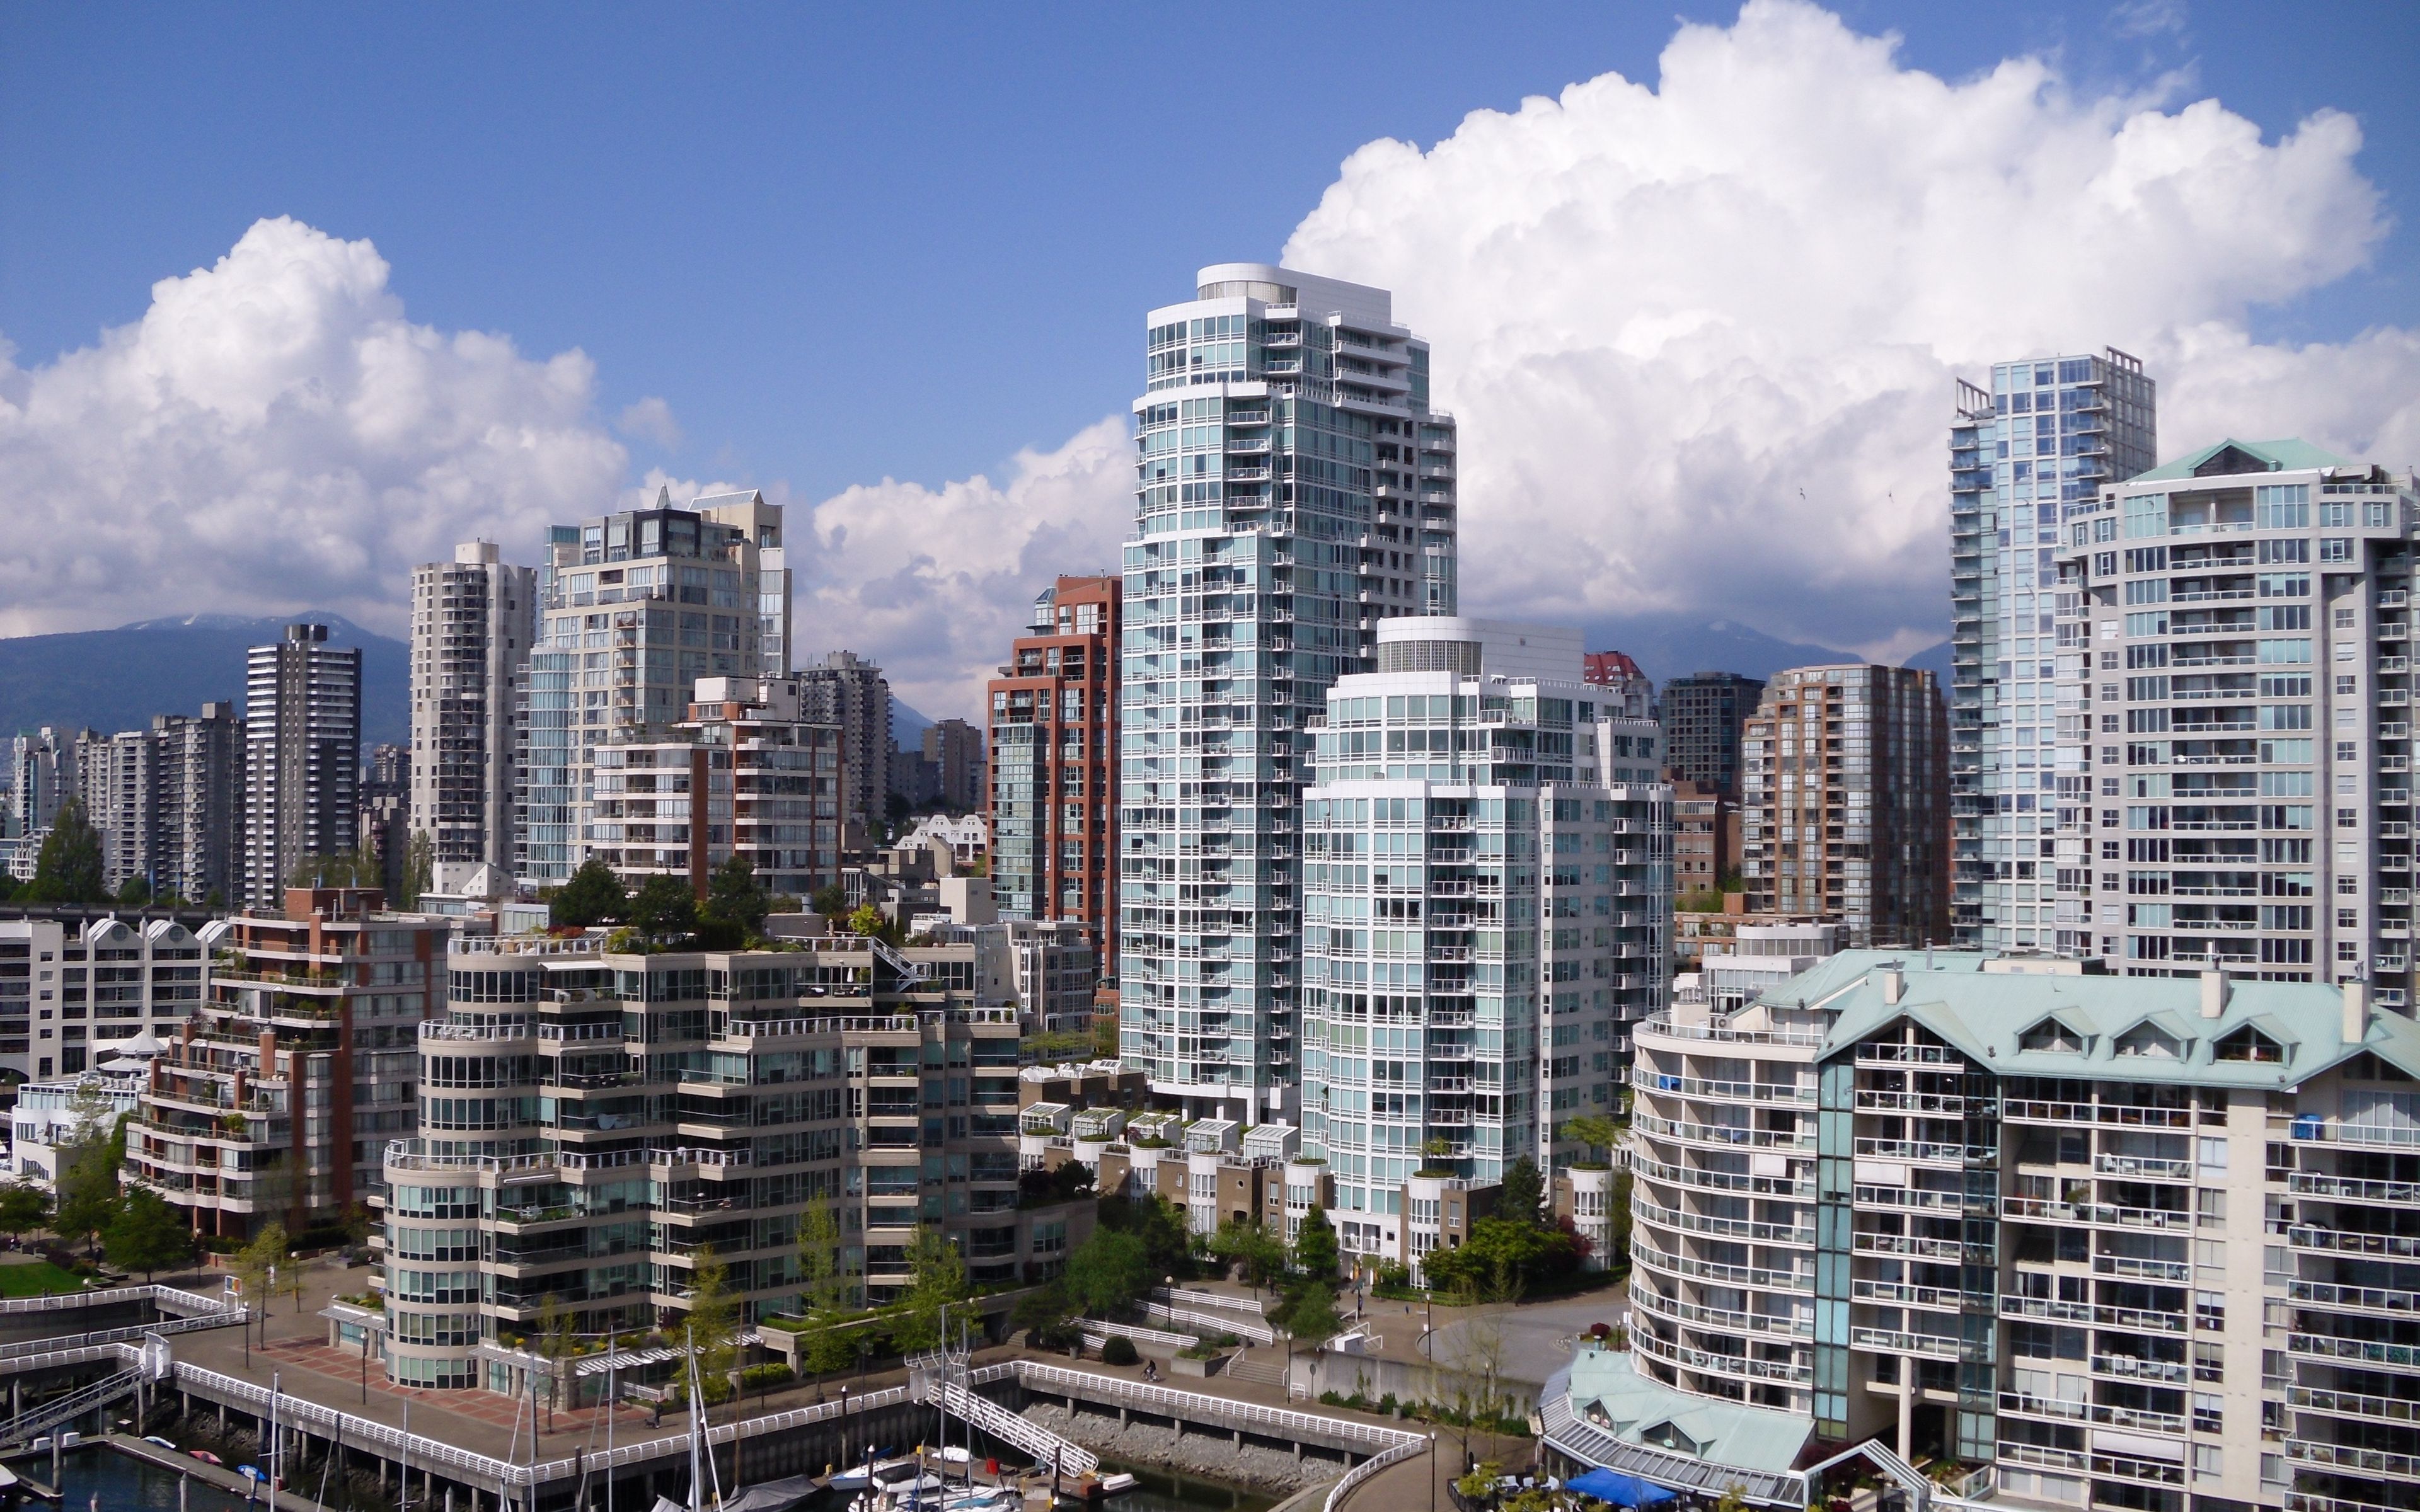 Download wallpaper 3840x2400 canada, vancouver, city, building 4k ultra hd  16:10 hd background